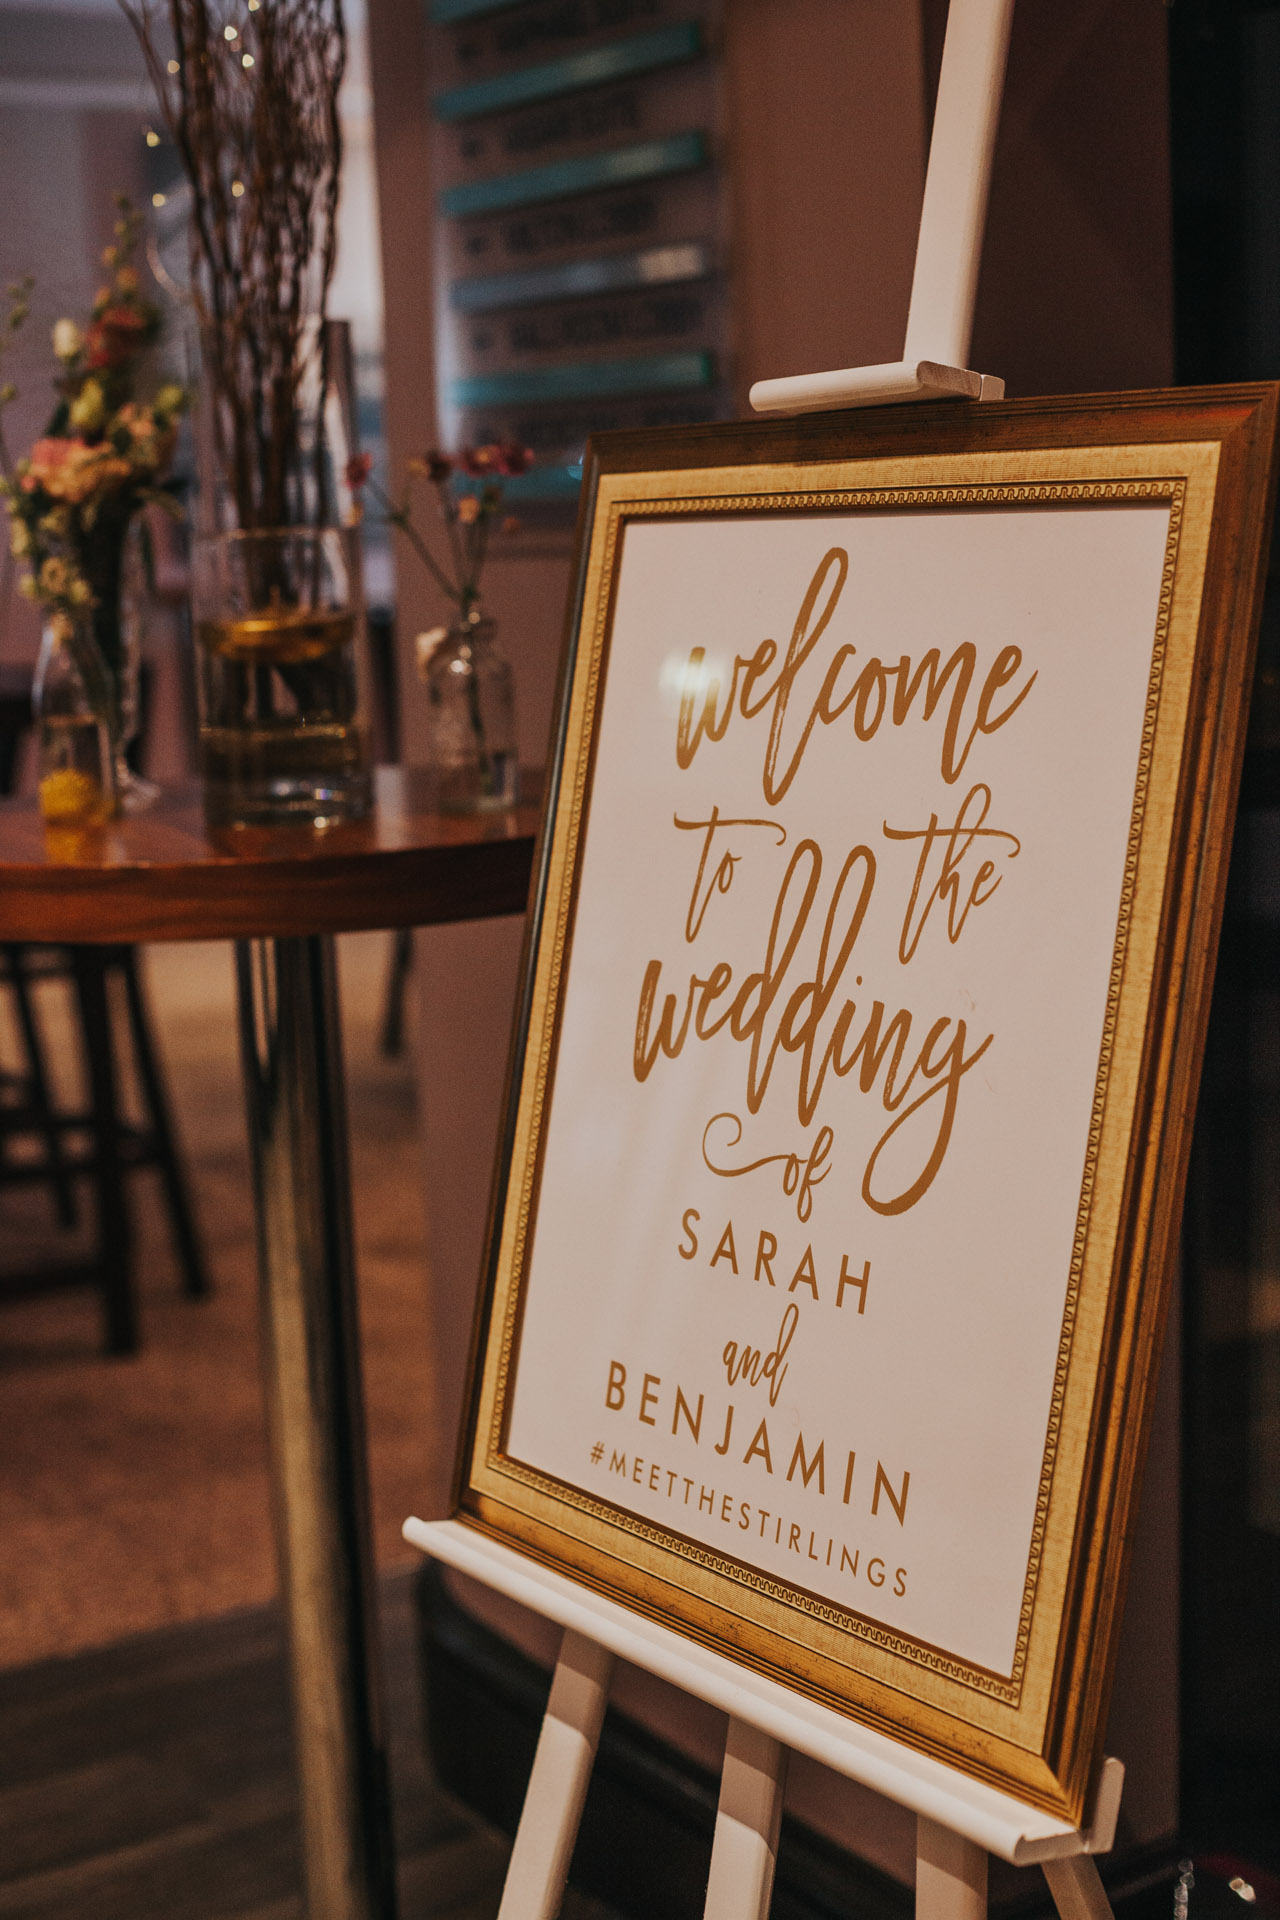 Welcome to the wedding sign.